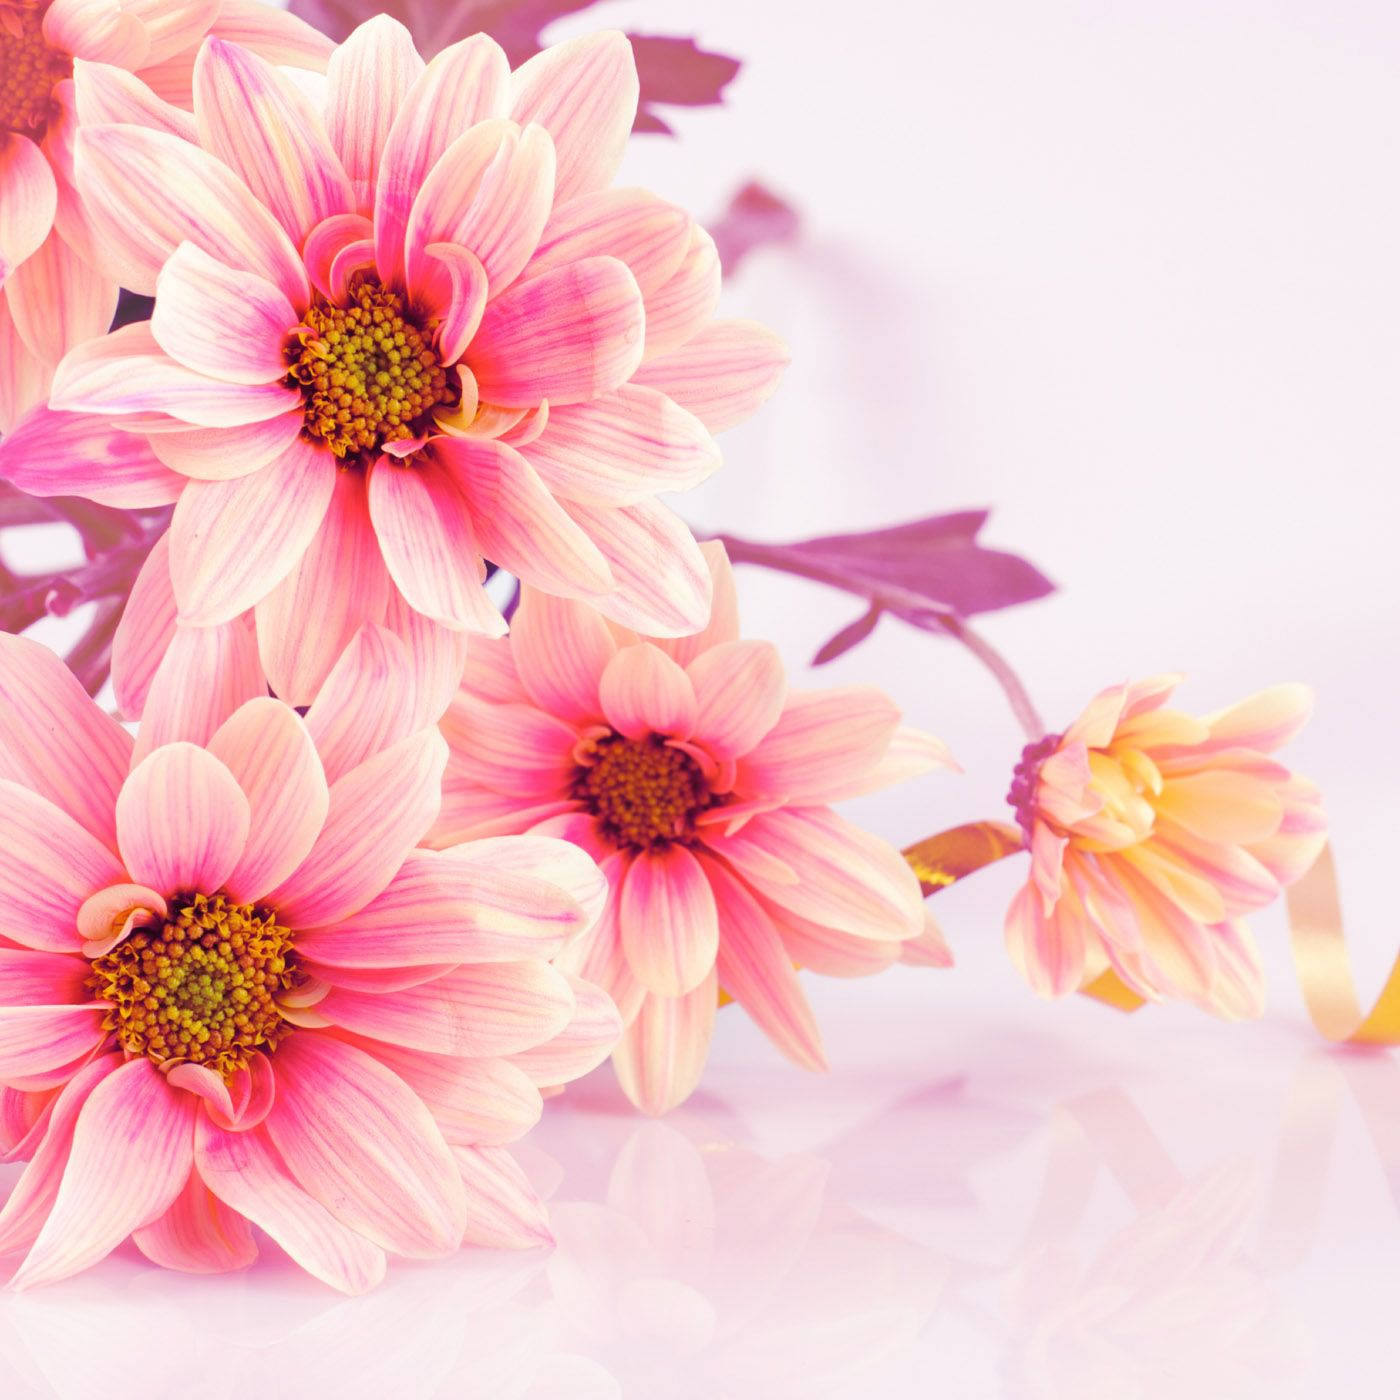 A spring-like bouquet of beautiful daisies Wallpaper